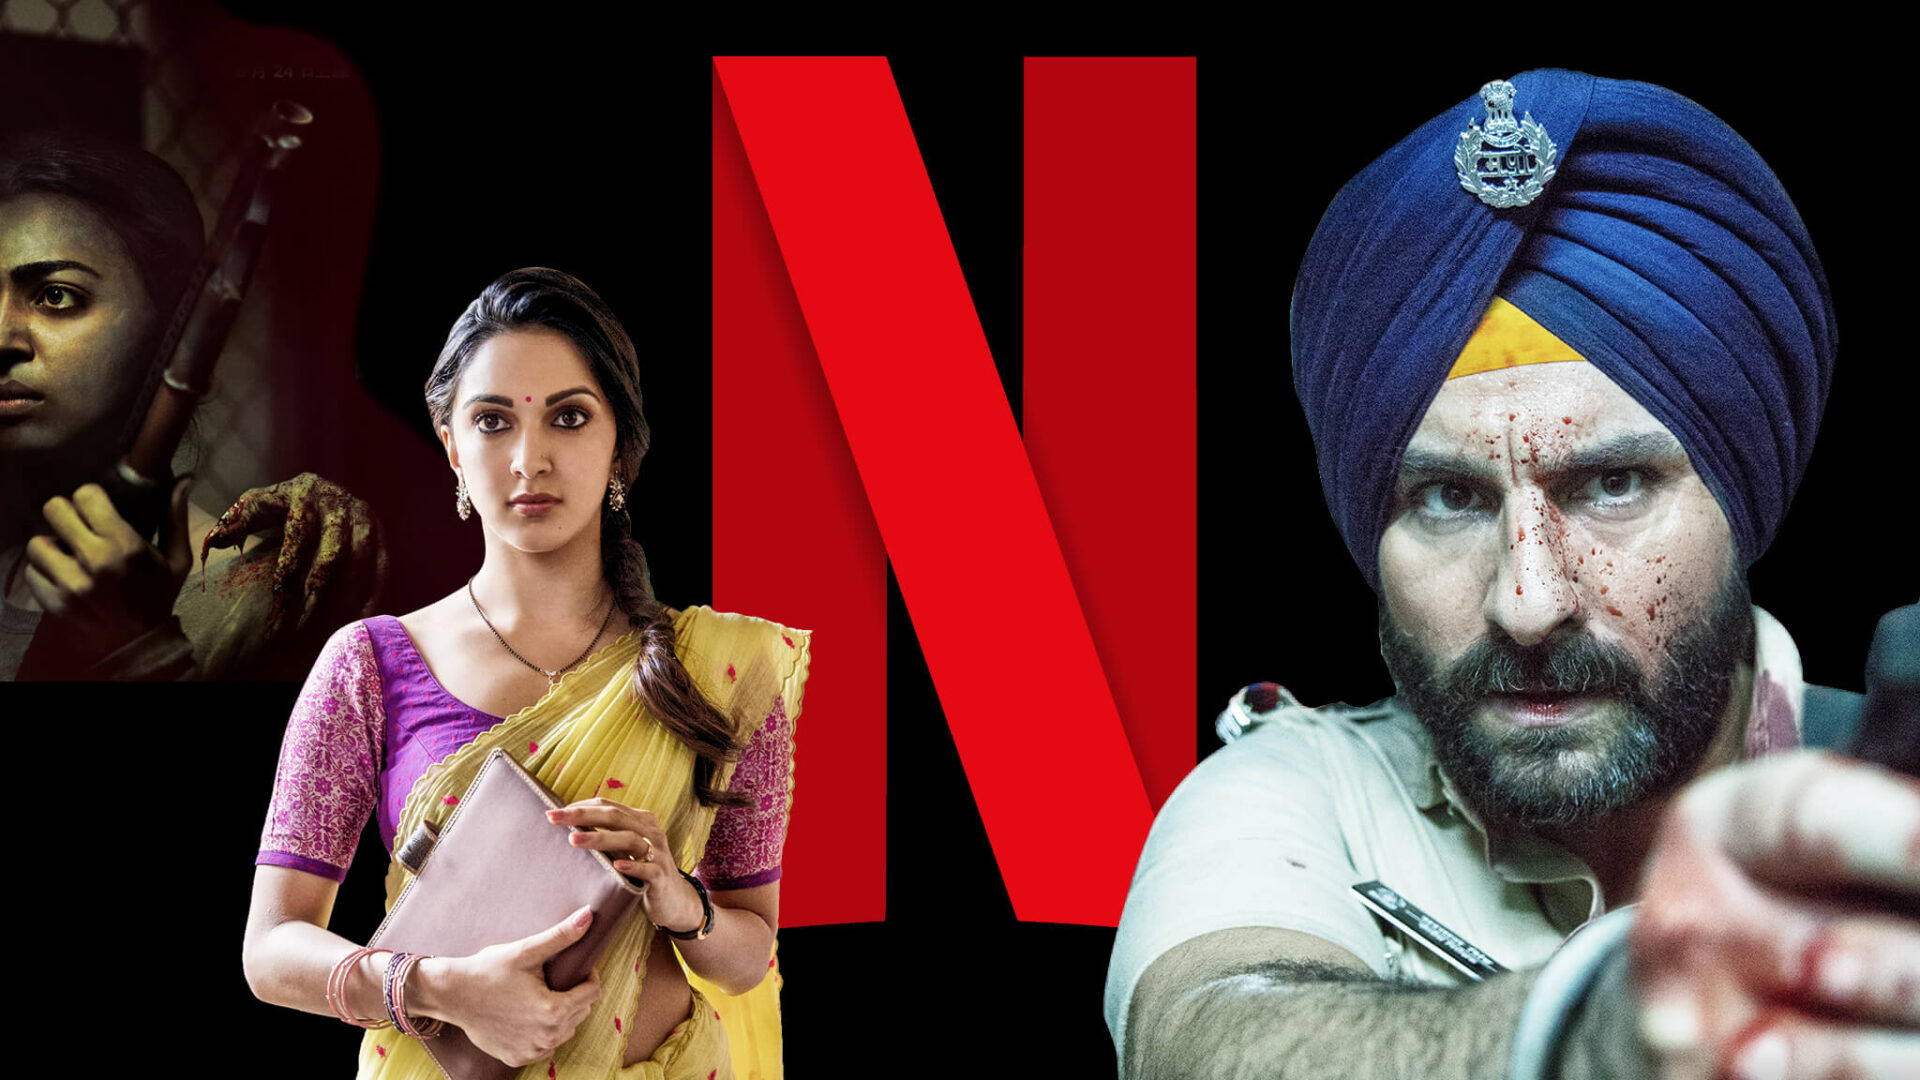 The story of Netflix becoming a brand - But why did the owners get upset due to the low popularity in India